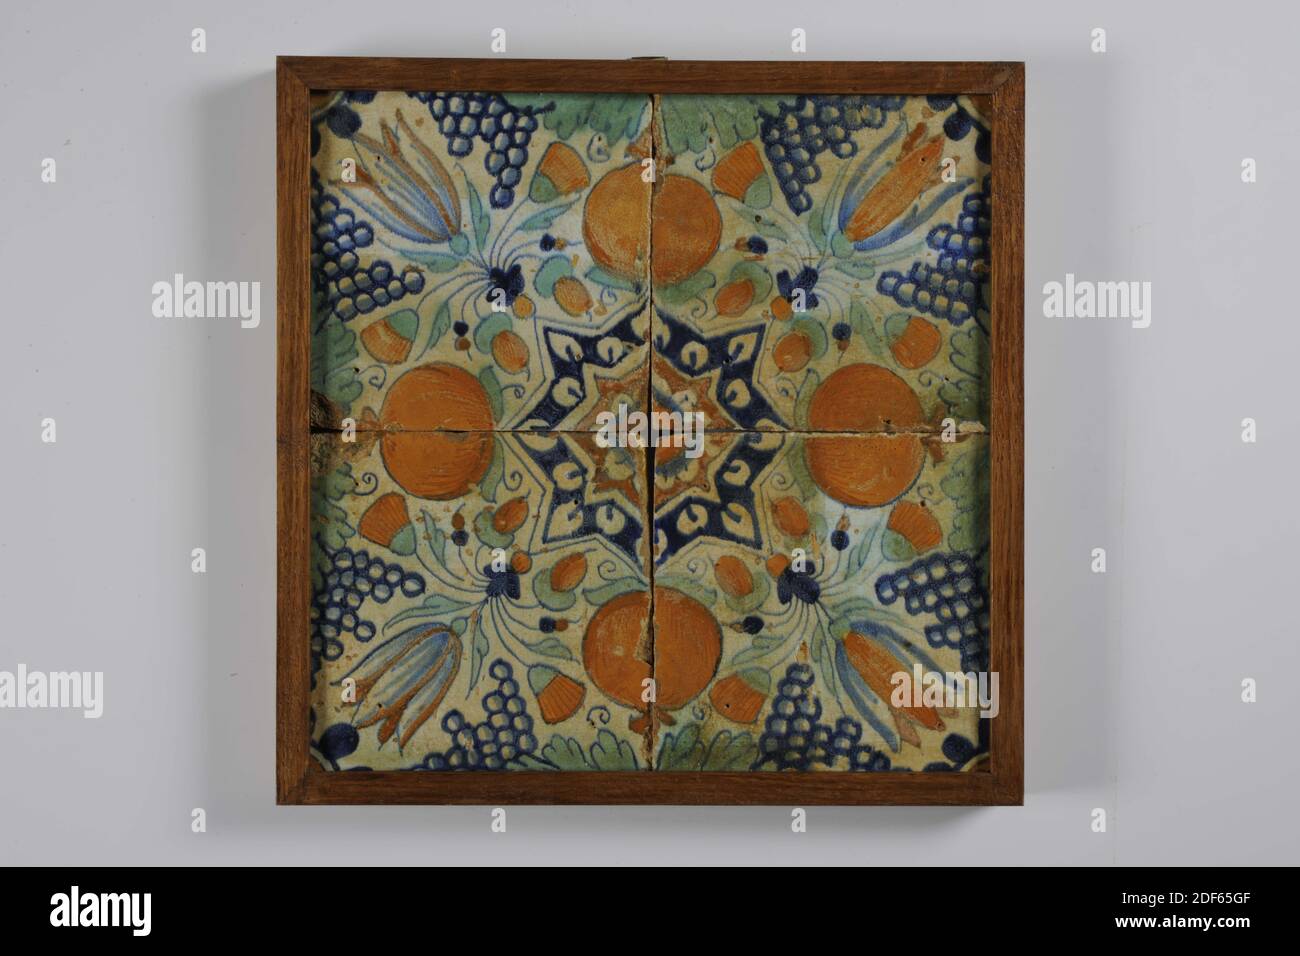 tile field, Anonymous, between 1610-1640, tin glaze, earthenware, With frame: 28.9 x 28.9 x 2.5cm (289 x 289 x 25mm), bunch of grapes, orange apple, tulip, Tile field of four tiles (two by two) of earthenware covered with tin glaze. Multicolor painted in blue, green, orange and orange brown. A star tulip is depicted on the tiles in a diagonal decor. Half an orange apple and bunch of grapes on the sides. The tiles have a star tulip and quarter rosette as corner motif, 1995 Stock Photo